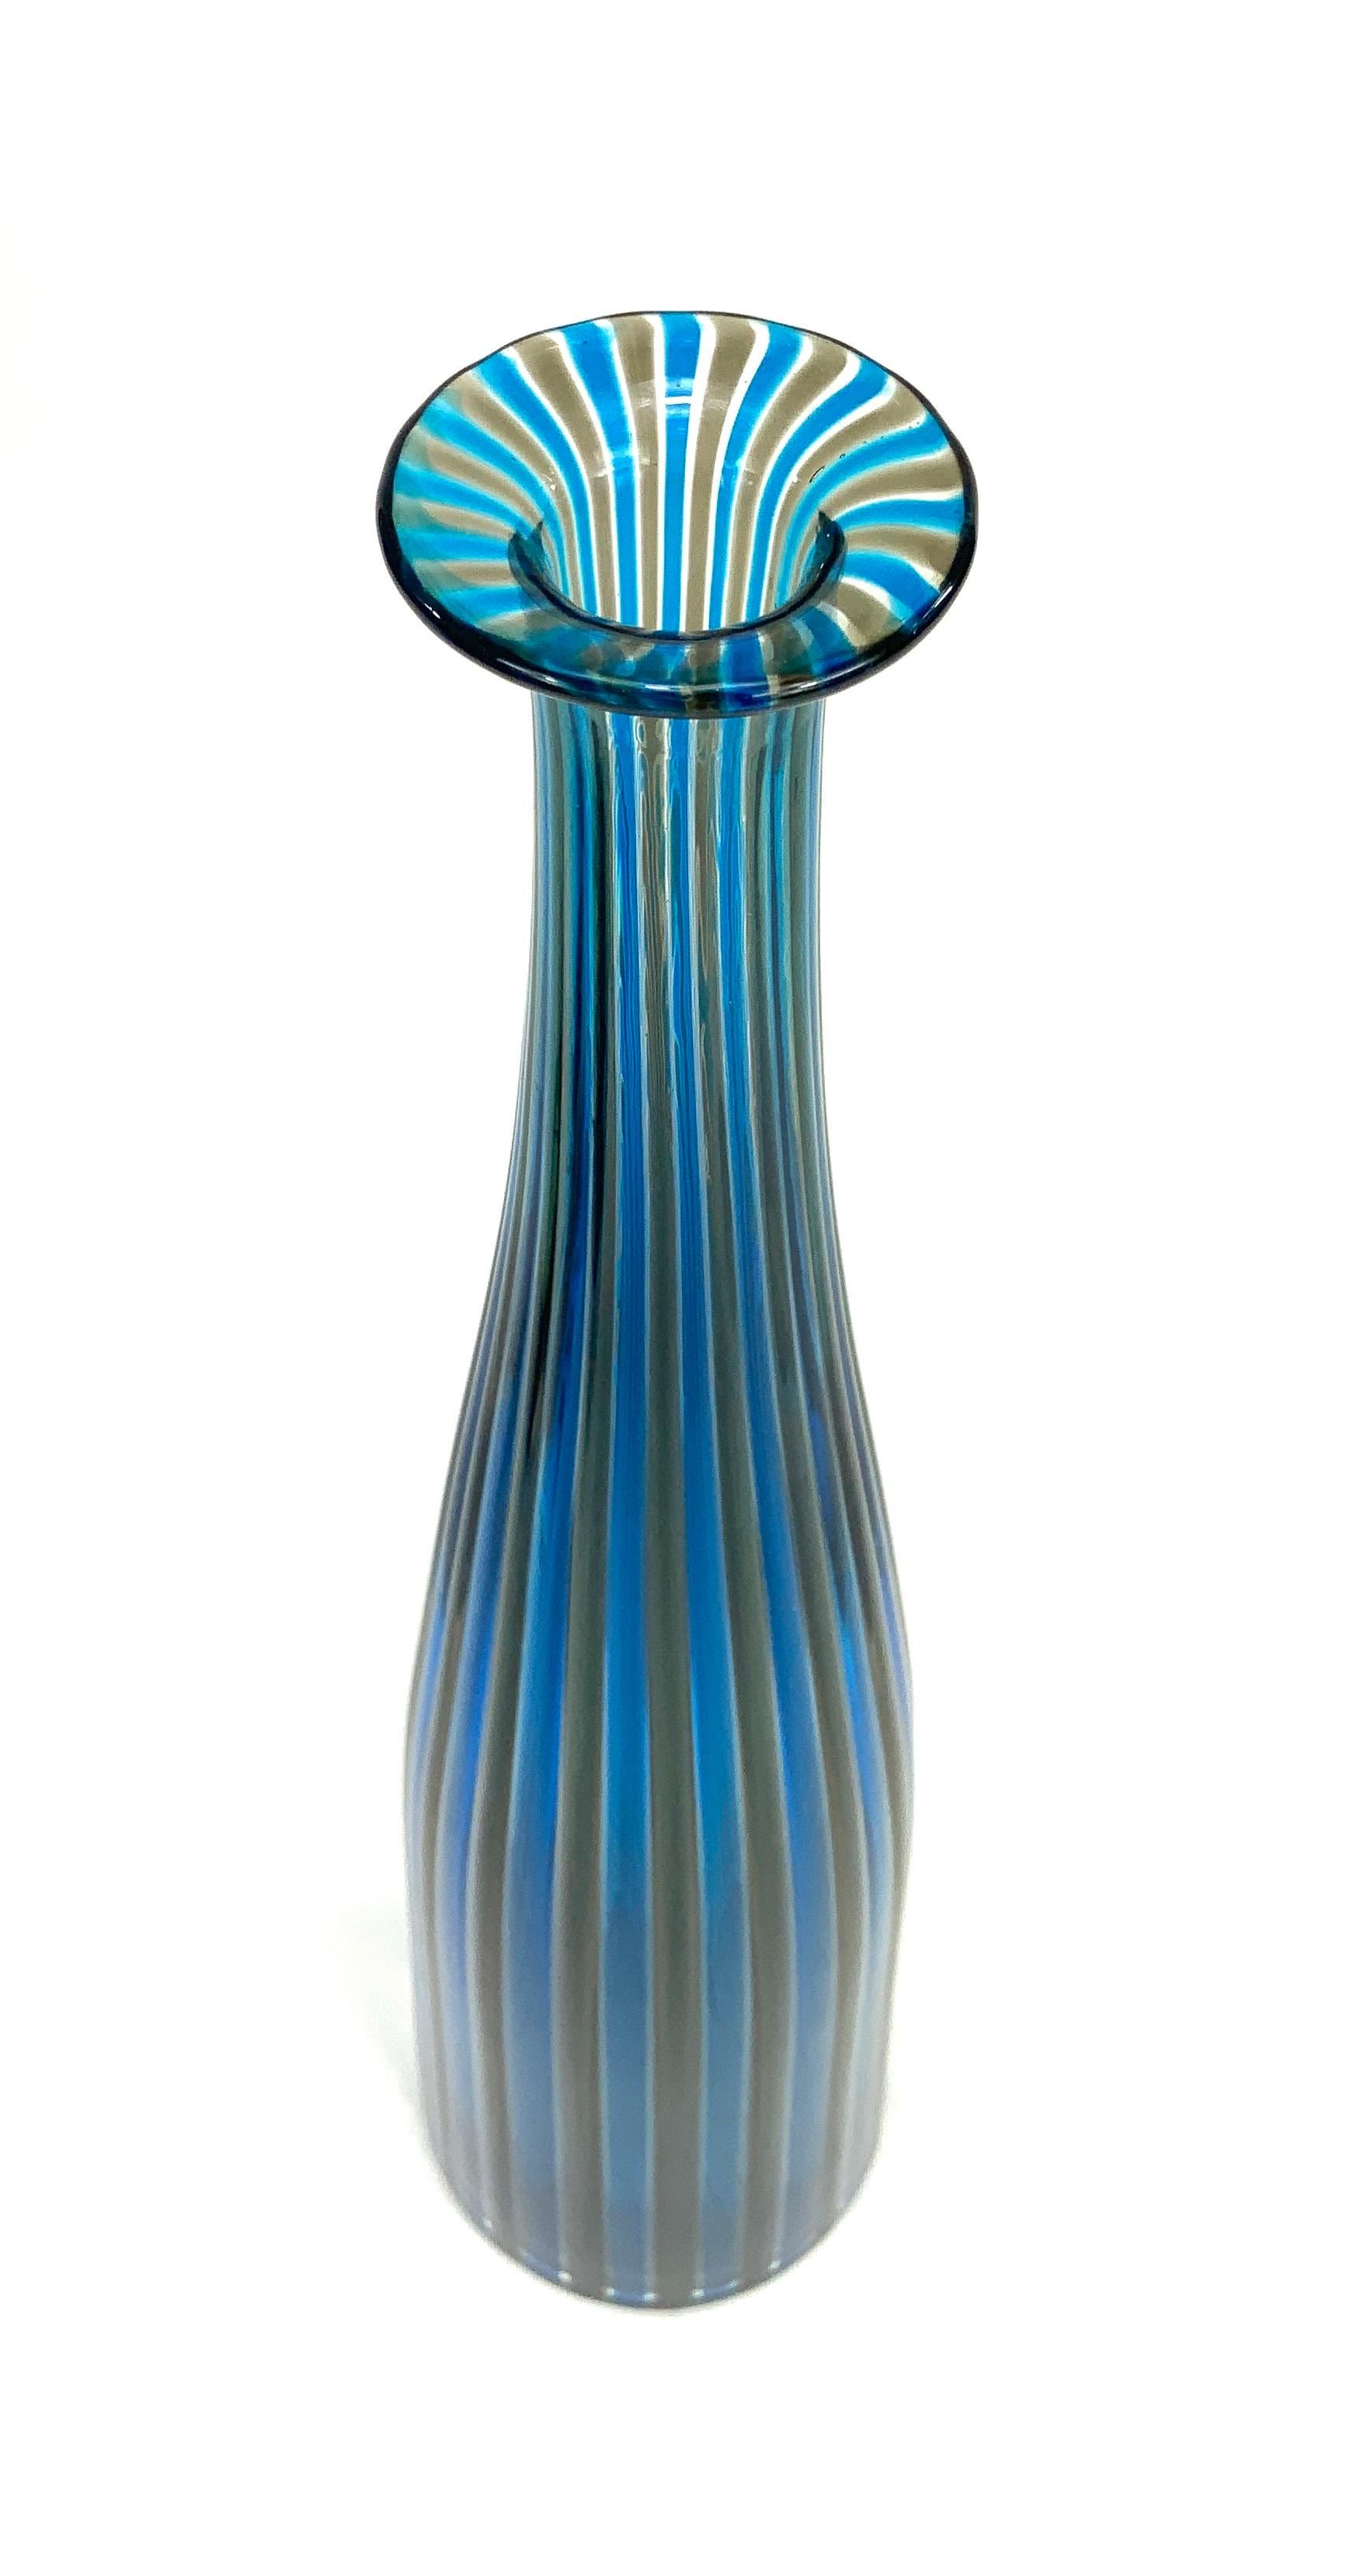 Fulvio Bianconi is one of the most prolifdic post-war artists to work in collaboration with the Venini glassware company, a giant of 20th century glassmaking.  His works are featured in prestigious collections and museums all over the world.
As an